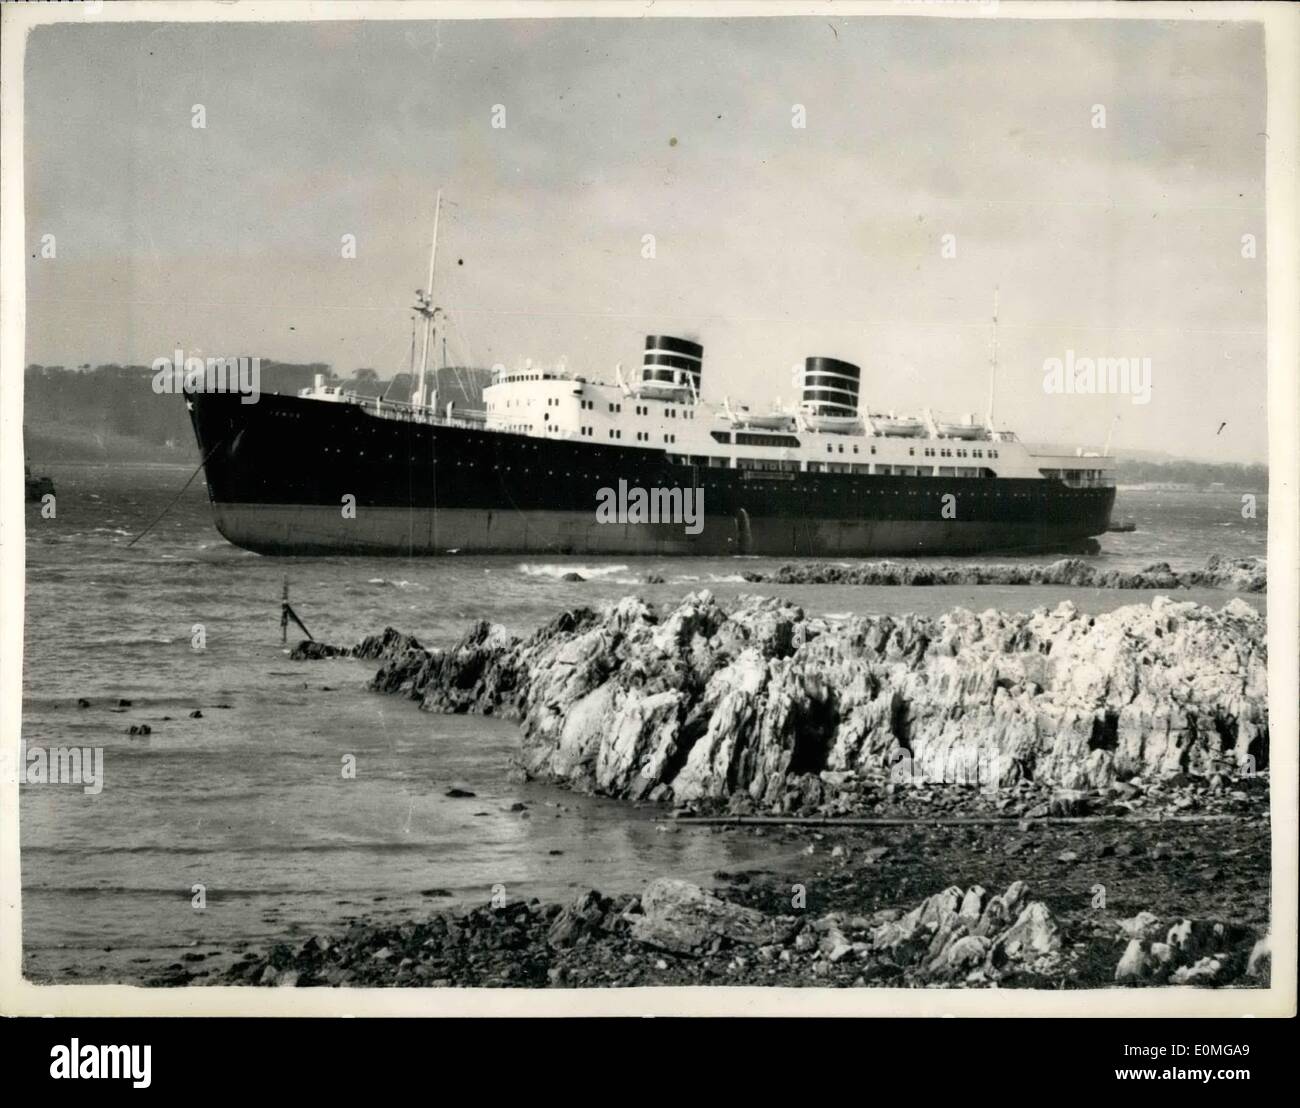 Mar. 23, 1955 - Norwegian liner swept on rocks by gale.. The S.S. Venus at Plymouth.. The 6269 ton Norwegian liner ''Venus'' was swept on to the rocks off Mount Batten, Plymouth today by the sixty mile an hour gale which swept Southern England. The 'Venus' is engaged on a weekly service to Madeira. She had landed 248 passengers from Madeira and Teneriffe, and was due to start the return trip this afternoon. It is not expected that the vessel can be refloated until this evening's tide Stock Photo